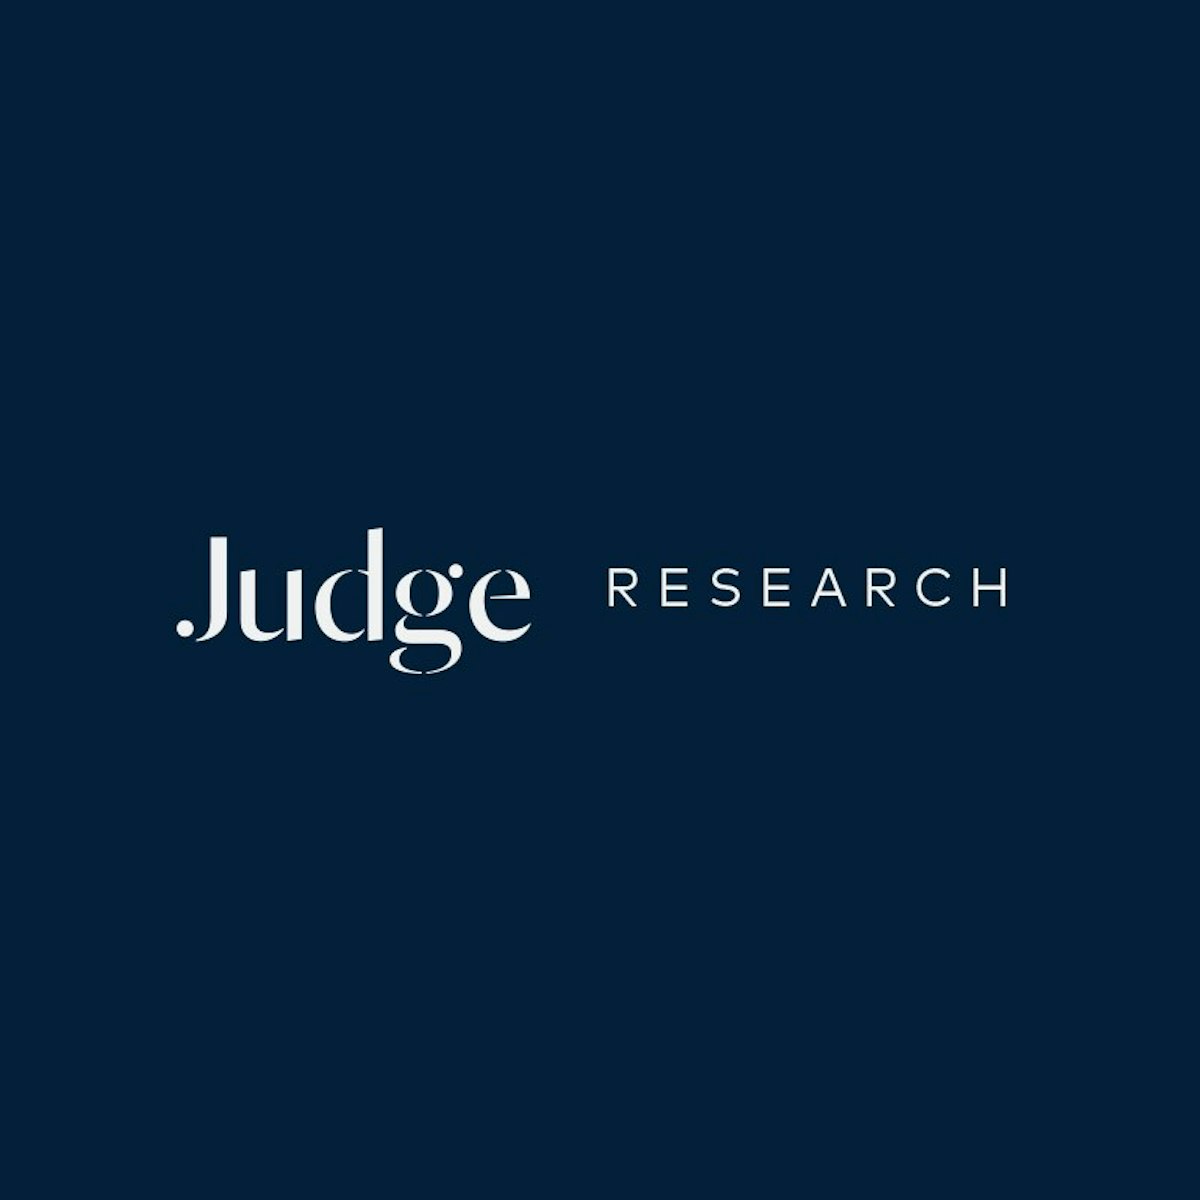 featured image - On Buy-Backs: Some Preliminary Findings From Judge Research